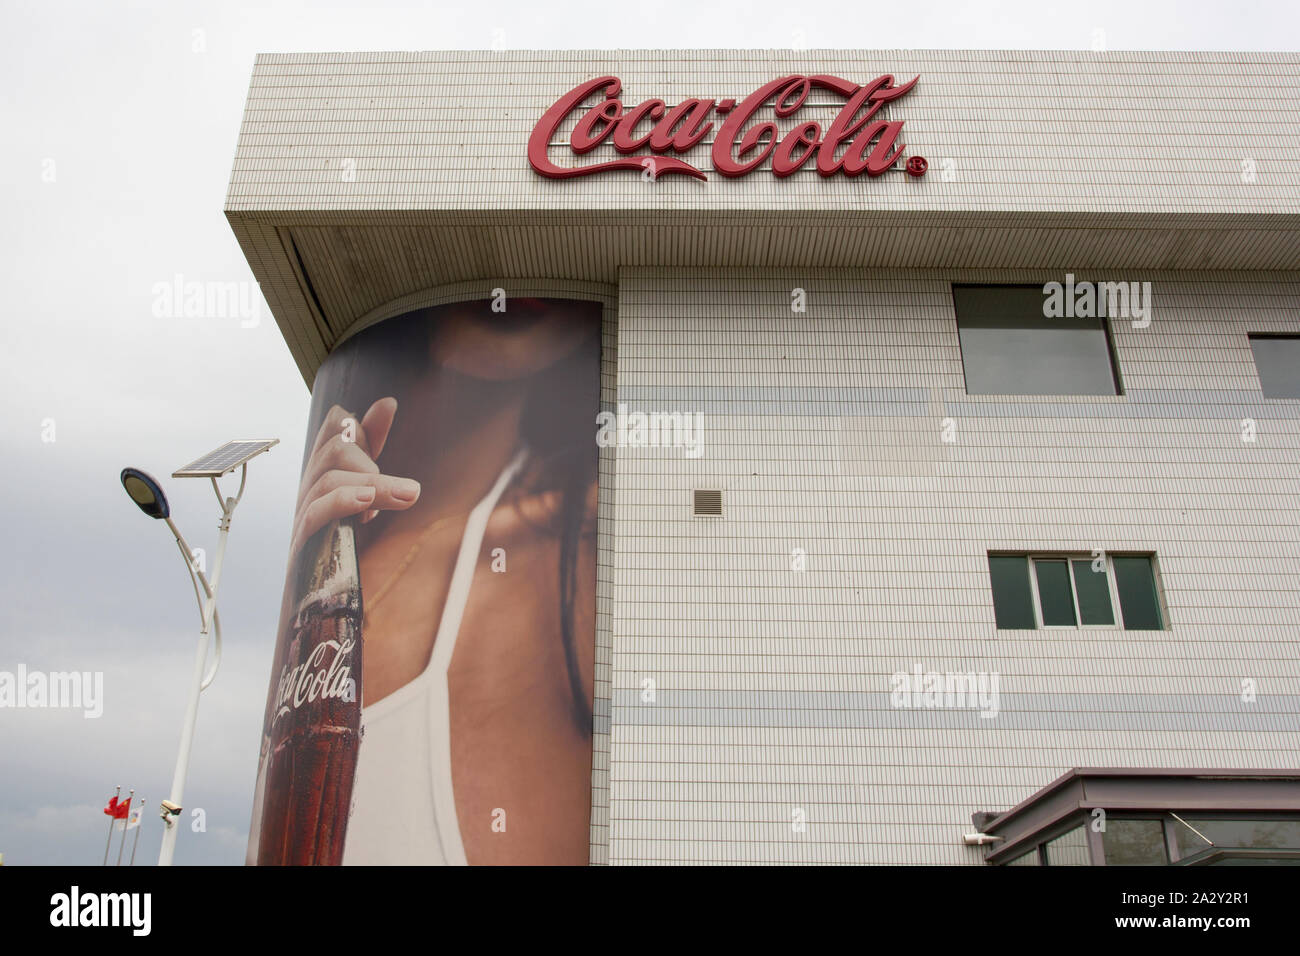 The Coca-cola logo is seen at the COFCO-Coca-cola joint venture's Beijing facility in suburban BDA on July 29, 2019. Stock Photo